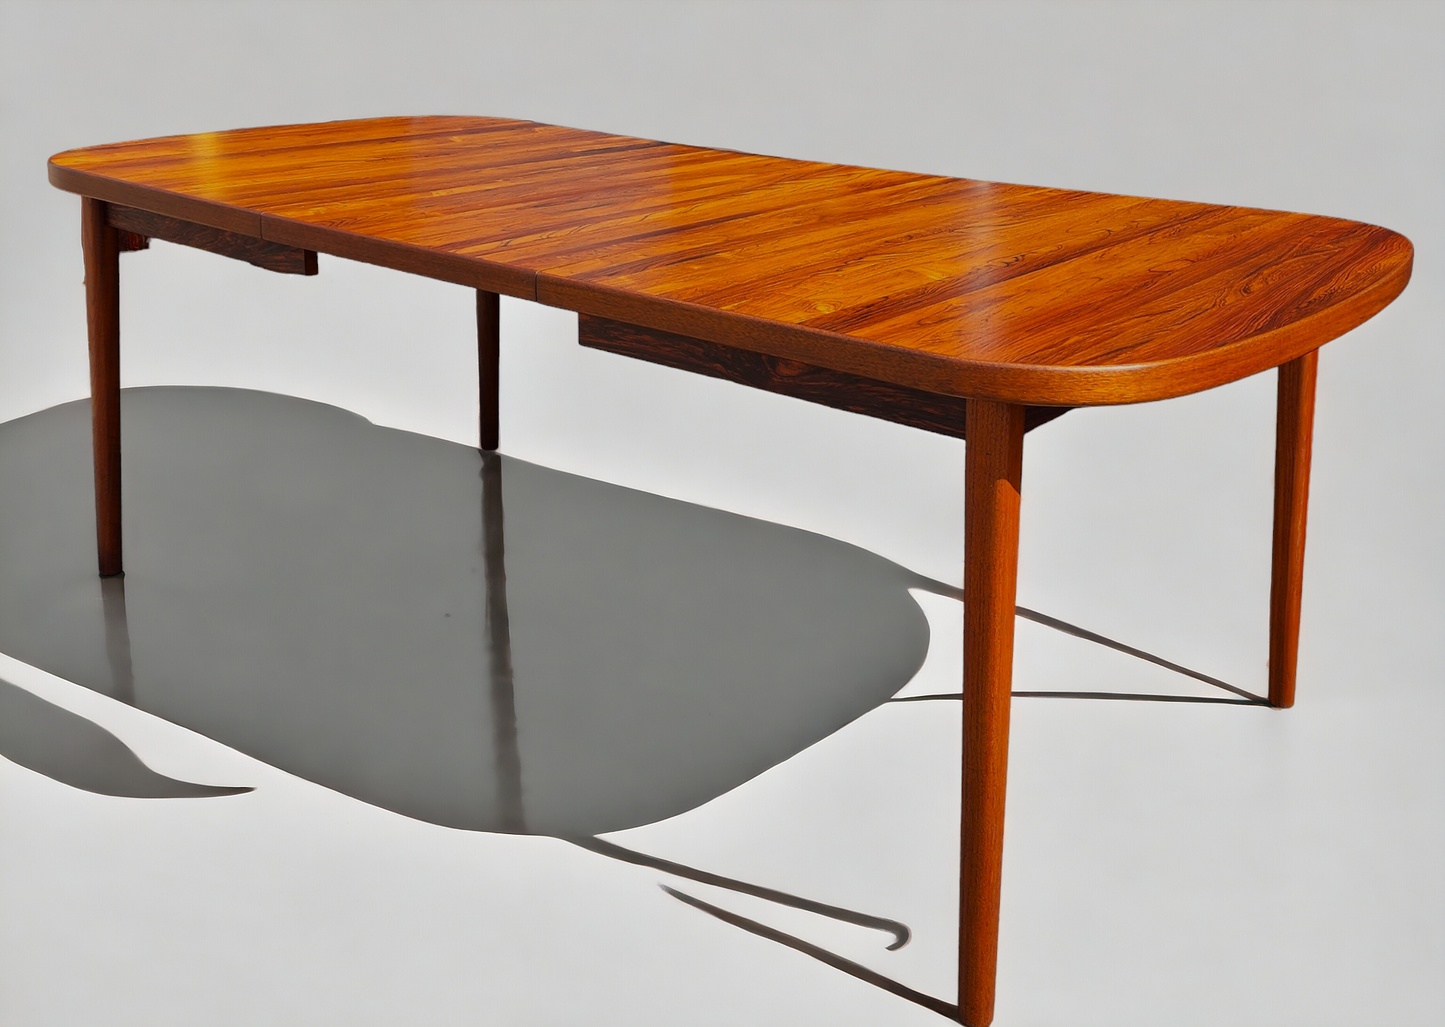 REFINISHED Danish Mid Century Modern Rosewood Table w 1 Leaf 61"- 82.5"